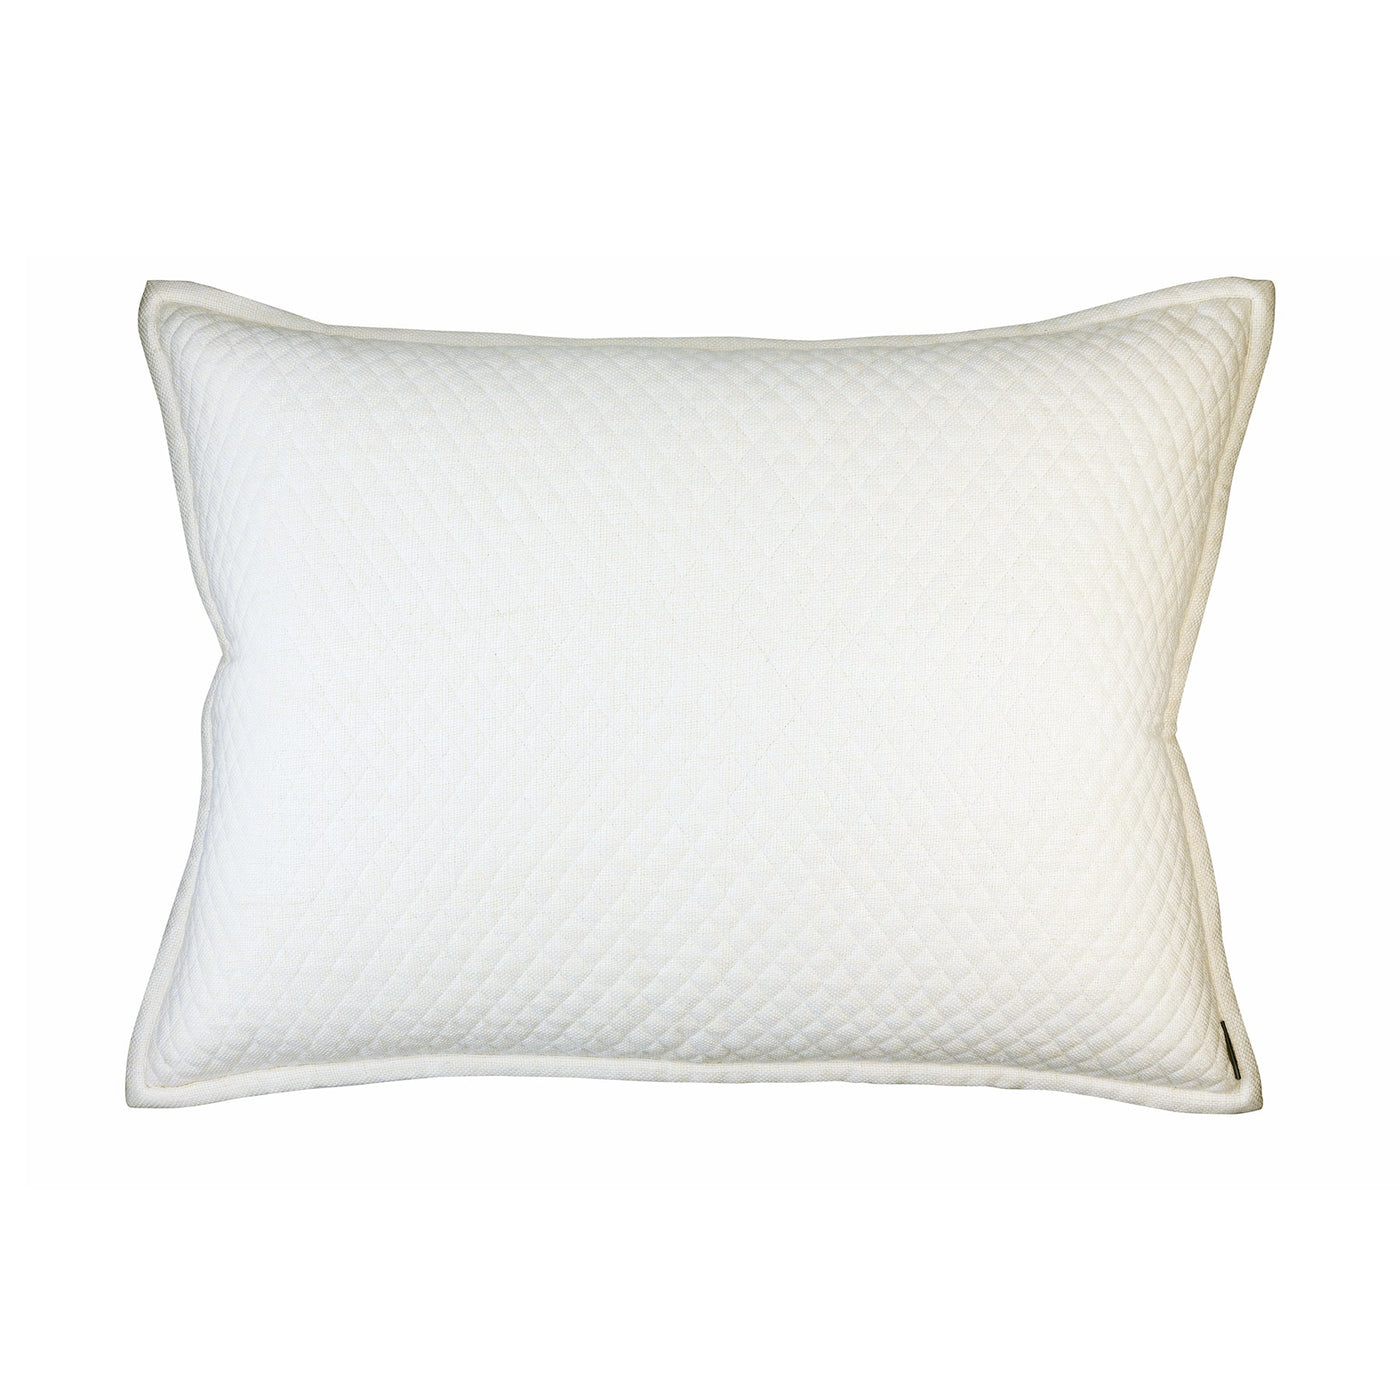 Laurie Quilted Luxe Euro Pillow Ivory Basketweave 27X36